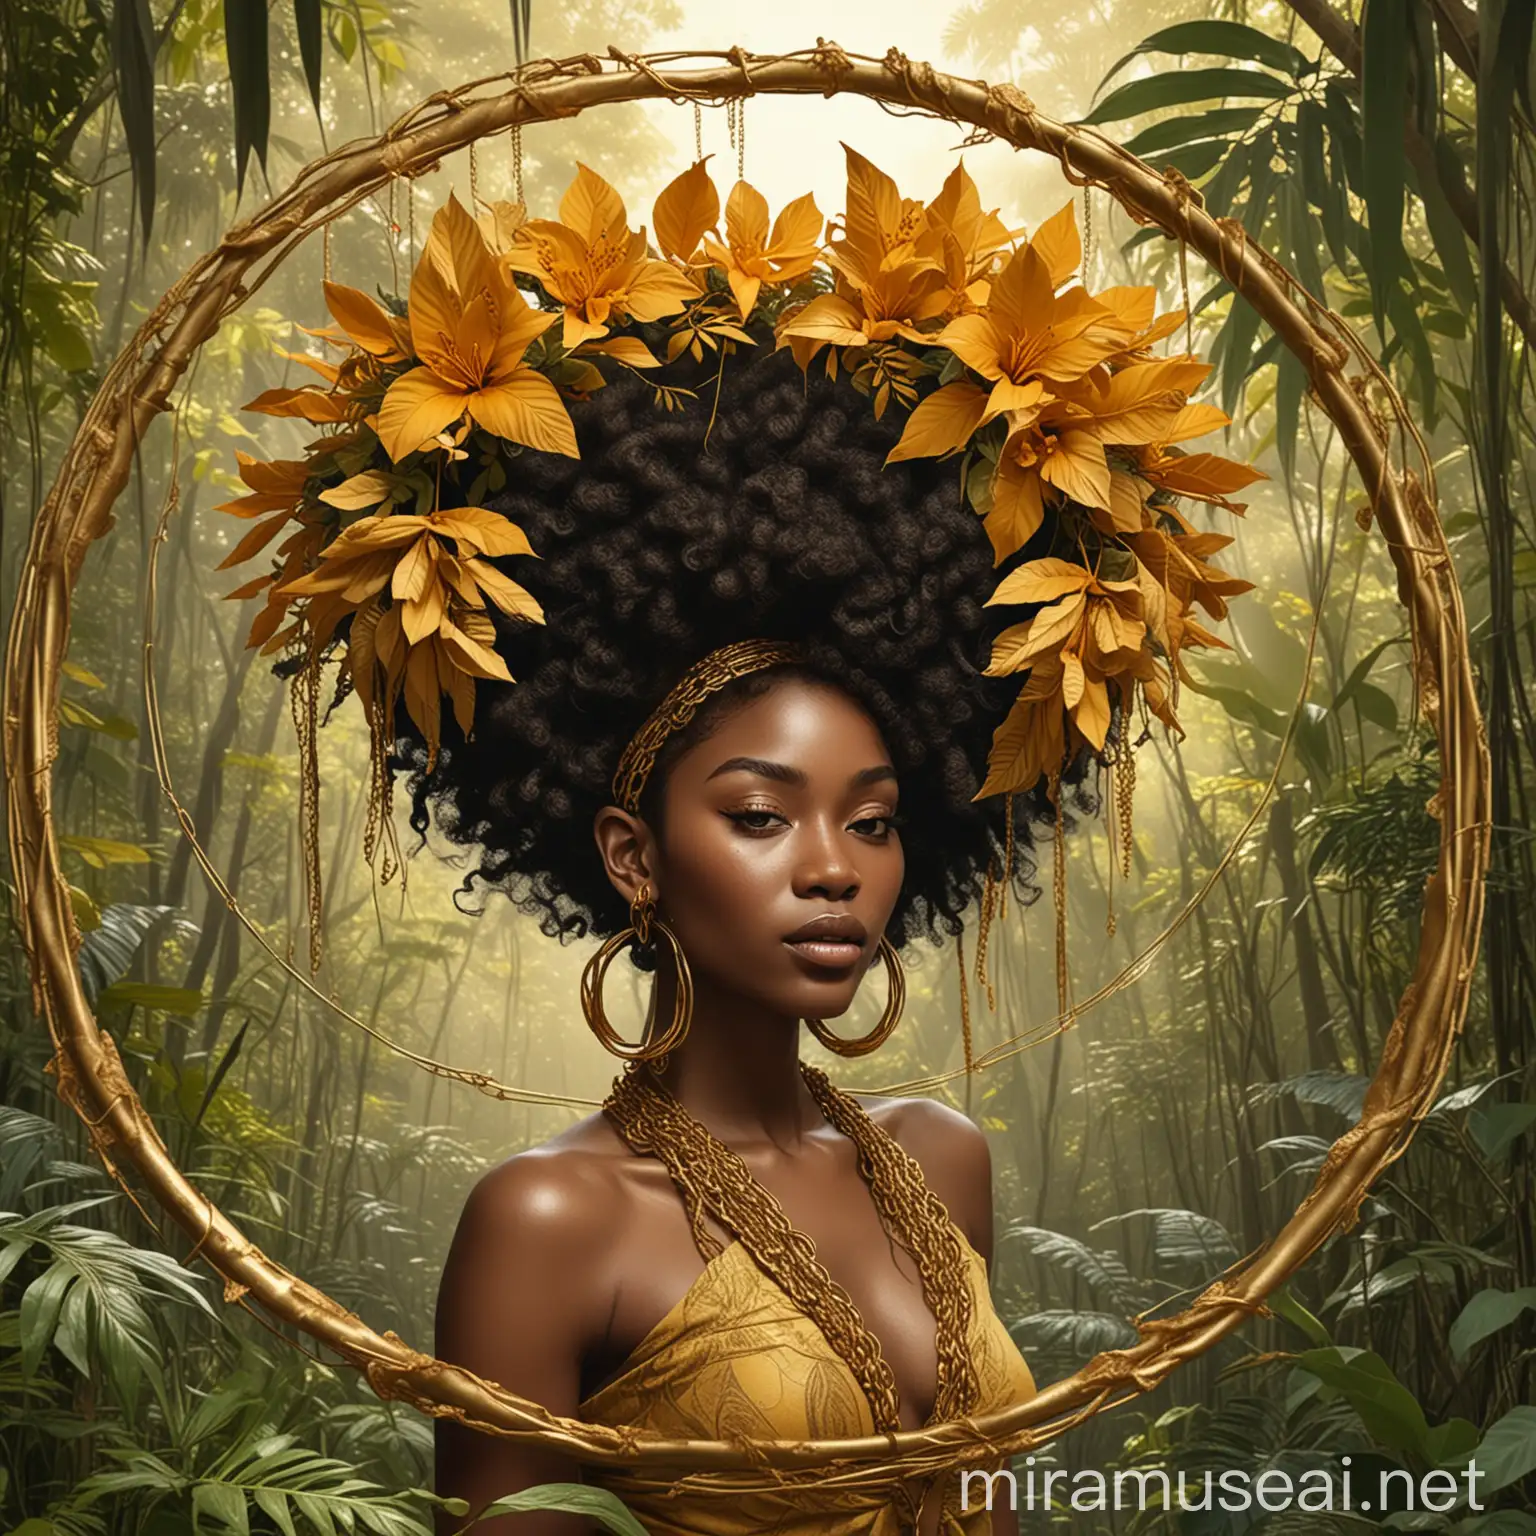 Empowered Black Woman in Jungle Golden Goddess Adorned with Hoops and Strings